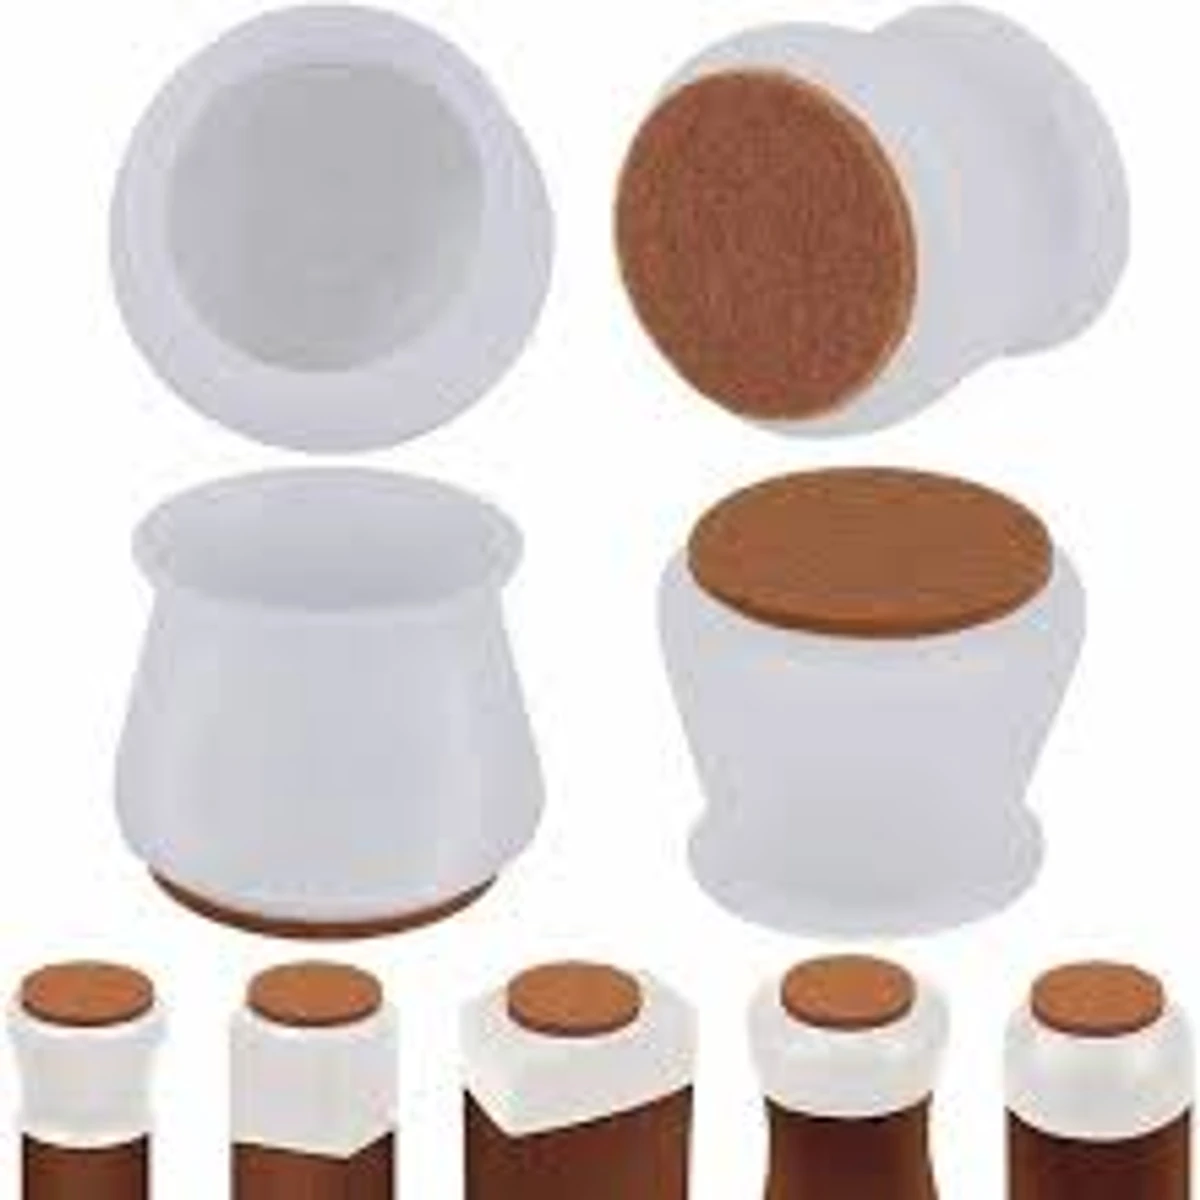 24 pcs Chair Leg Floor Protectors Felt Bottom Furniture Silicone Leg Caps, Chair Leg Covers to Reduce Noise, Easily Moving for Furniture Chair Feet,(white colour)